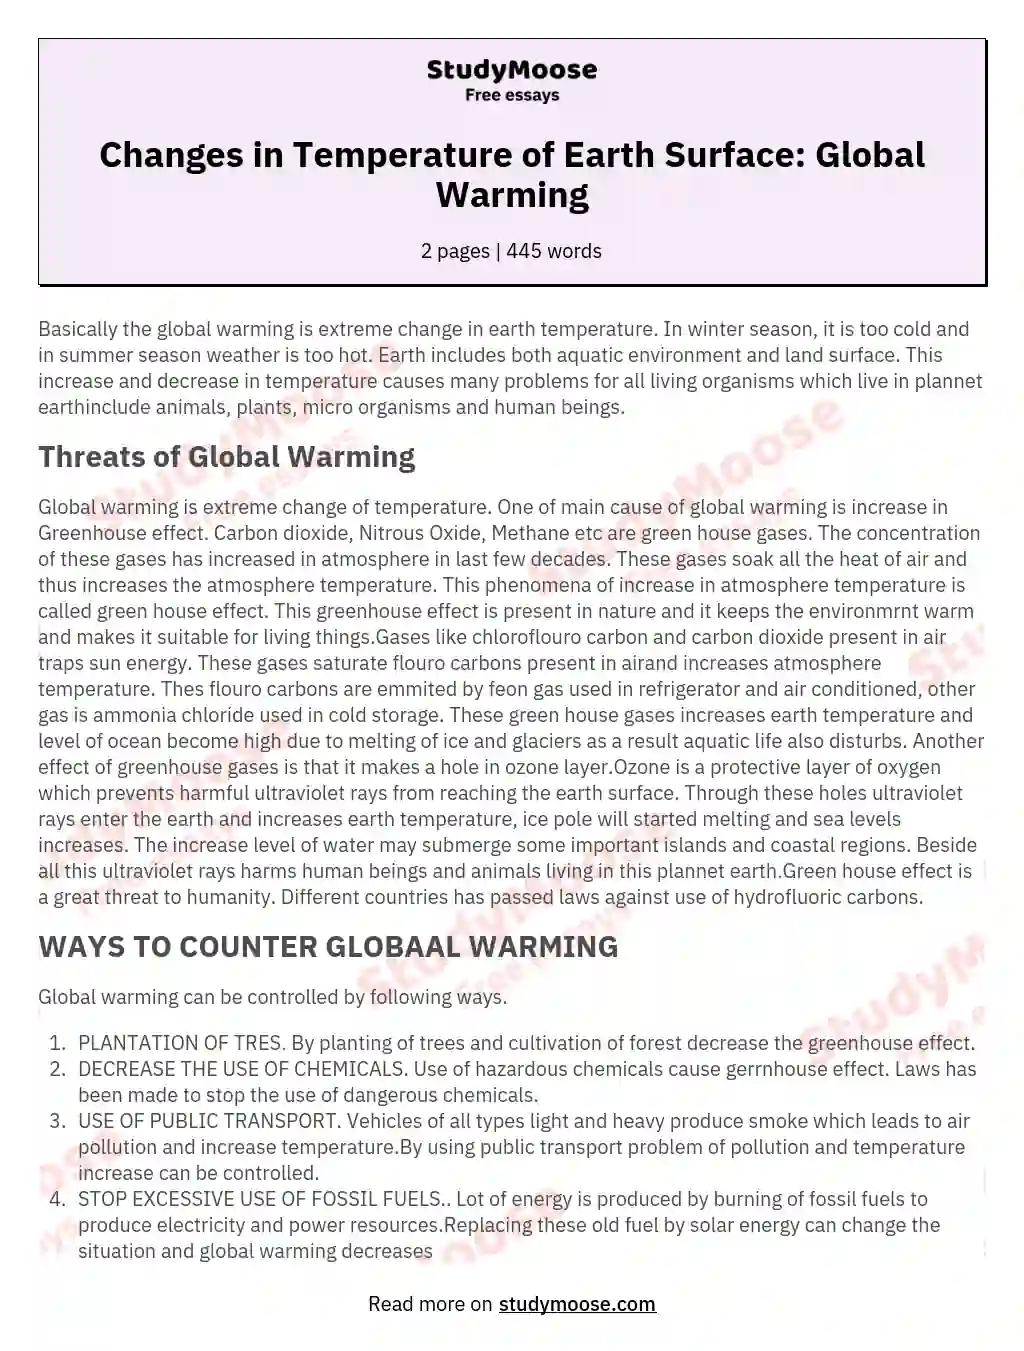 Changes in Temperature of Earth Surface: Global Warming essay